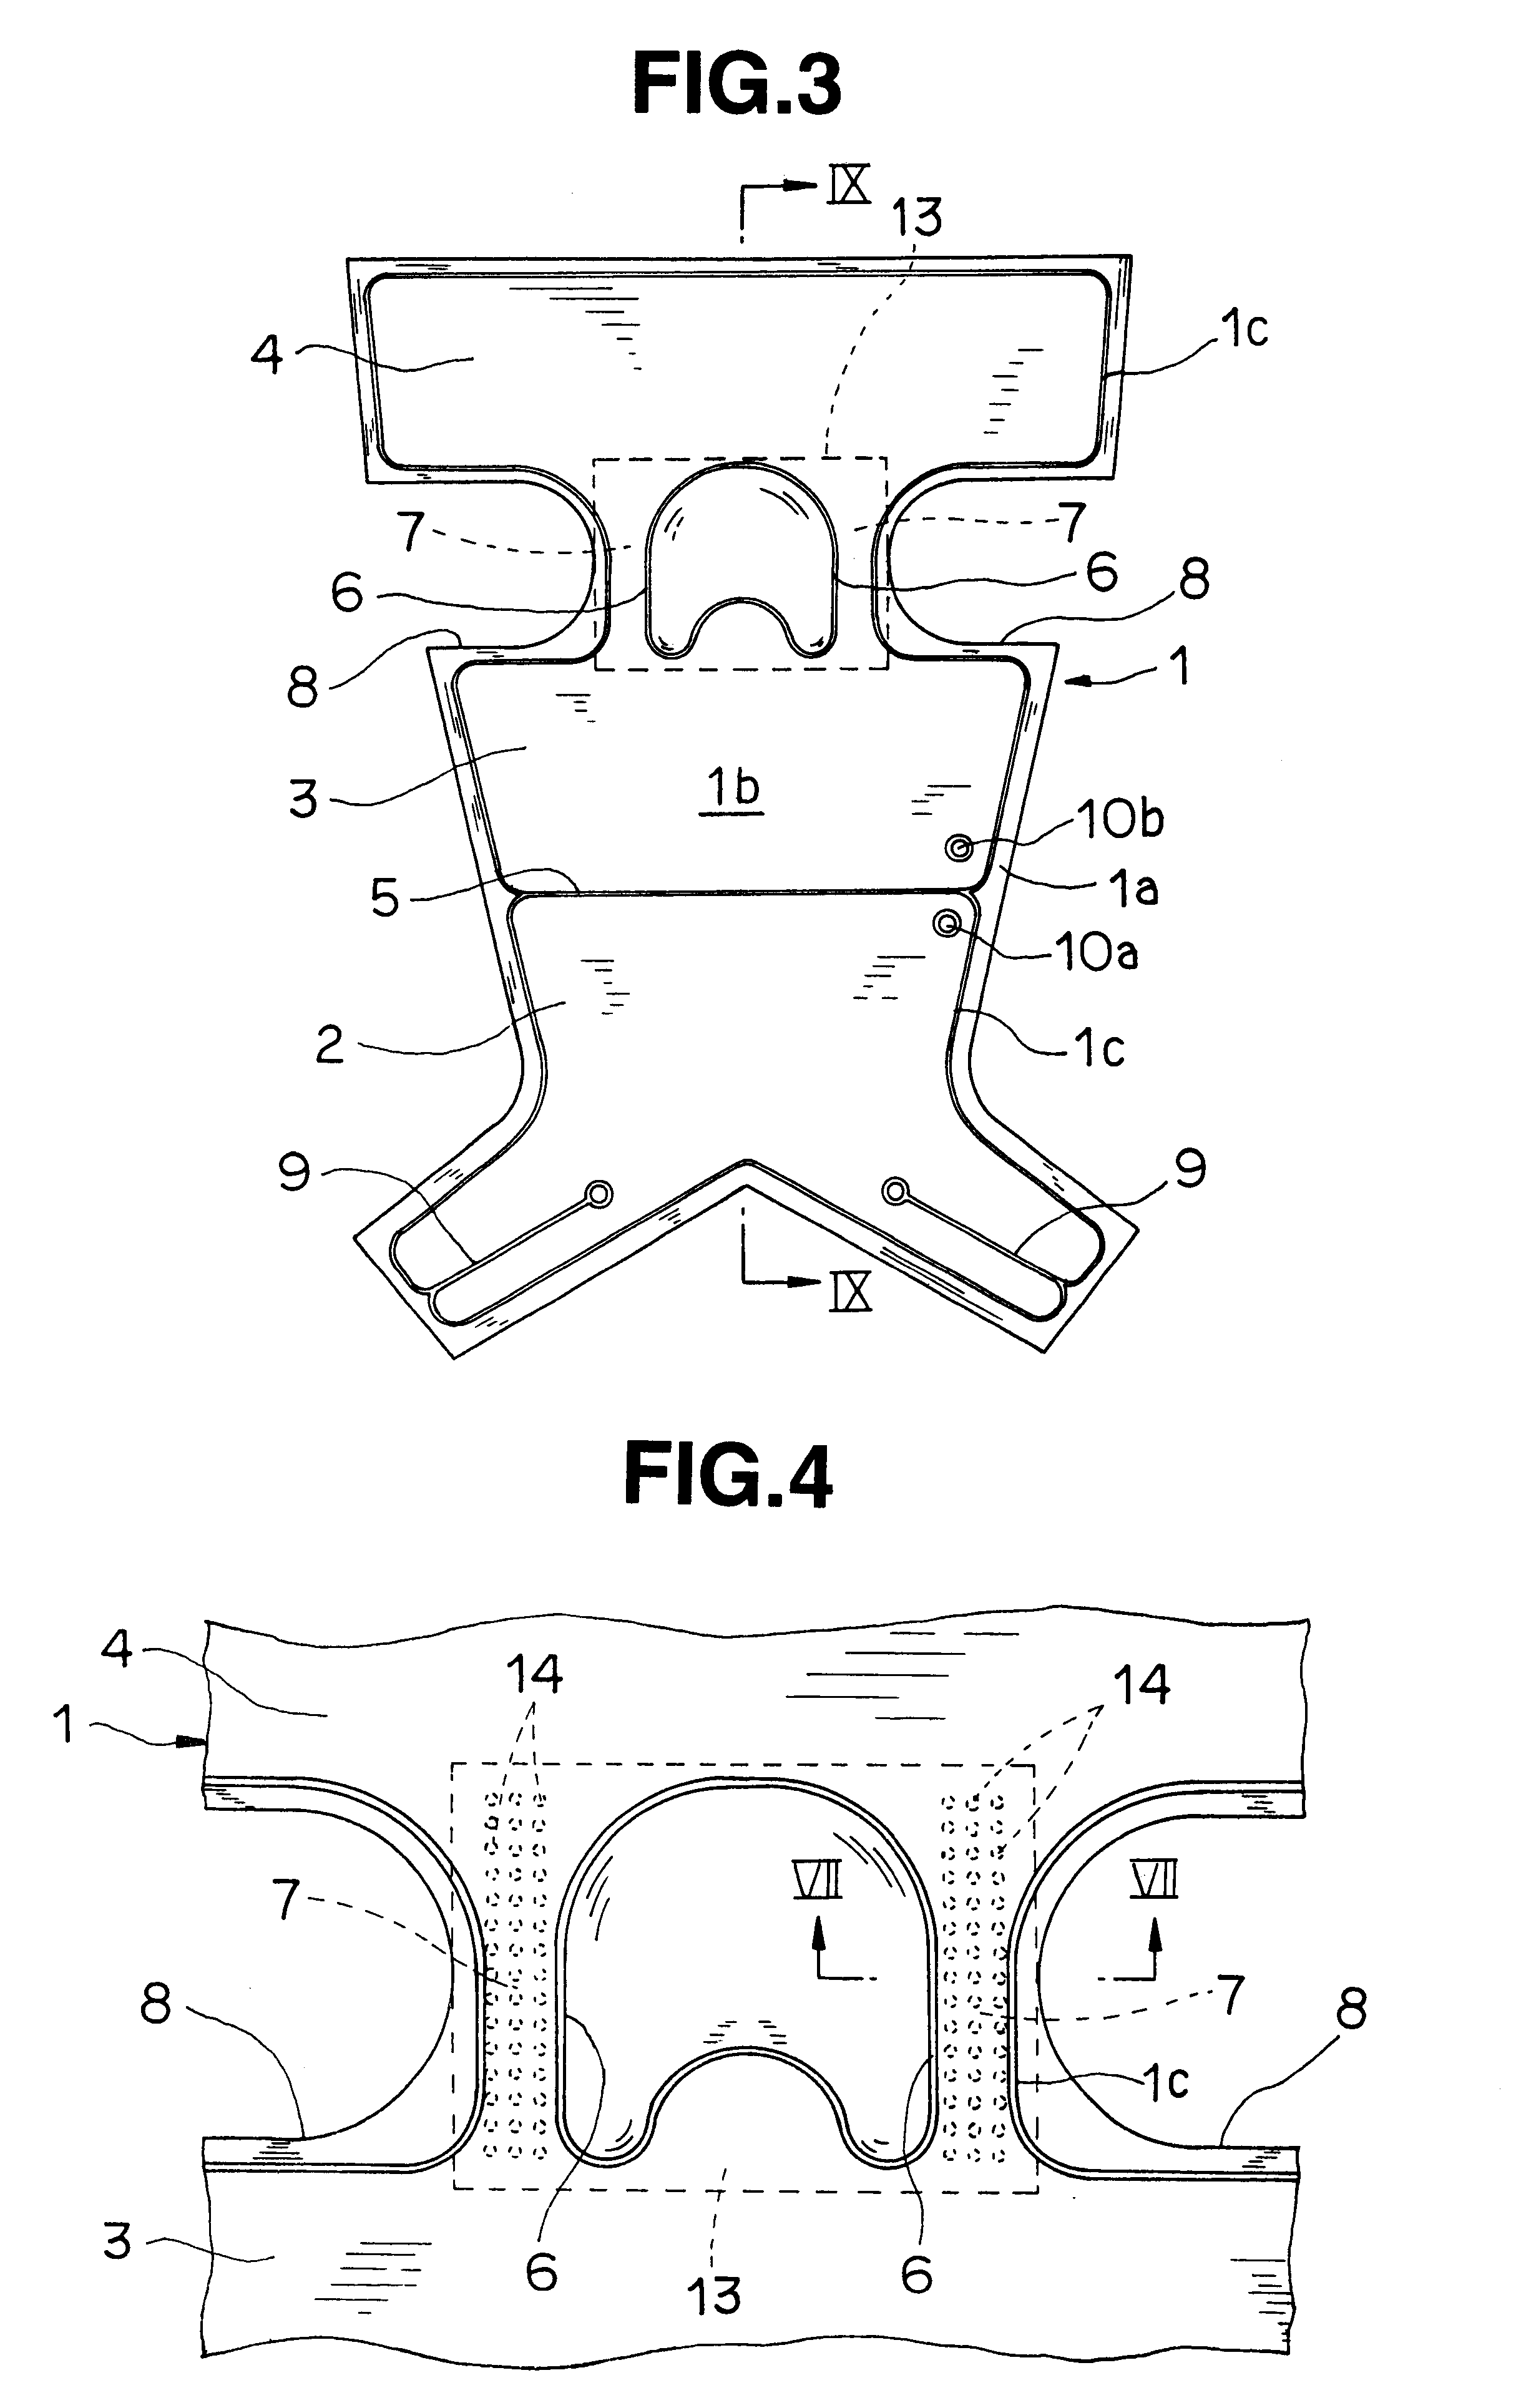 Compressing device for pneumatic massager